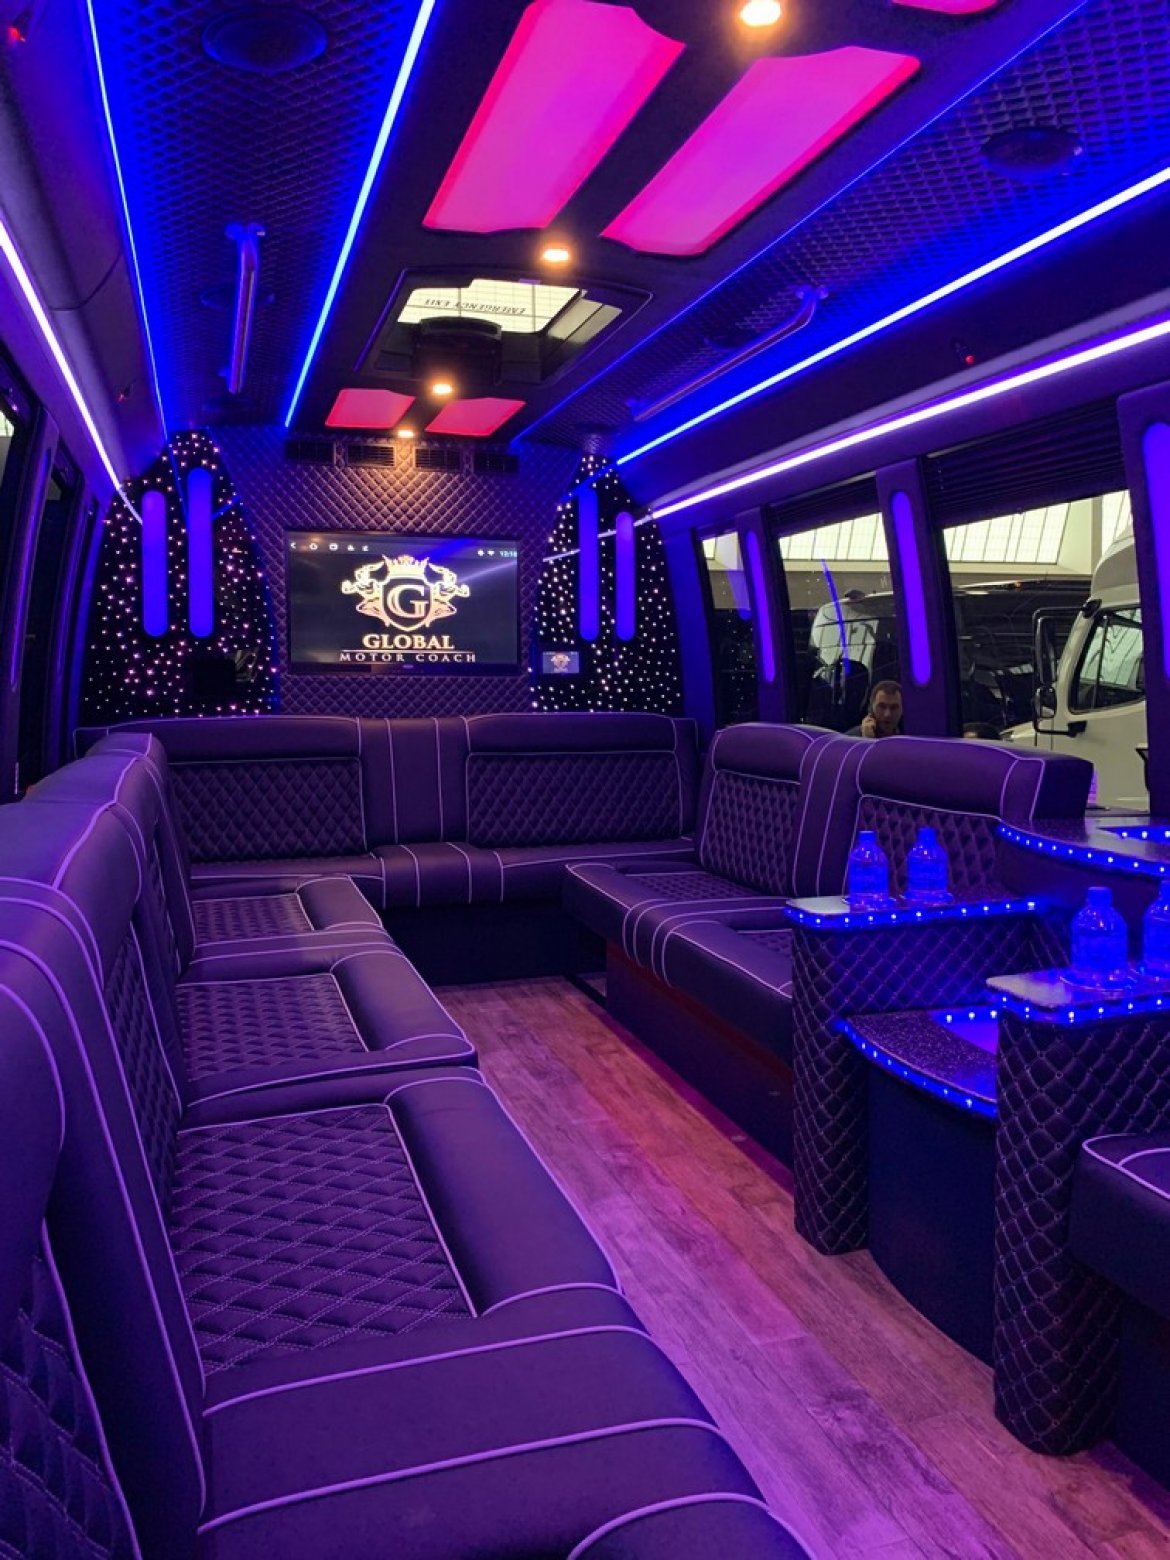 Limo Bus for sale: 2019 Ford E450 Limo Bus 275&quot; by Global Motor Coach